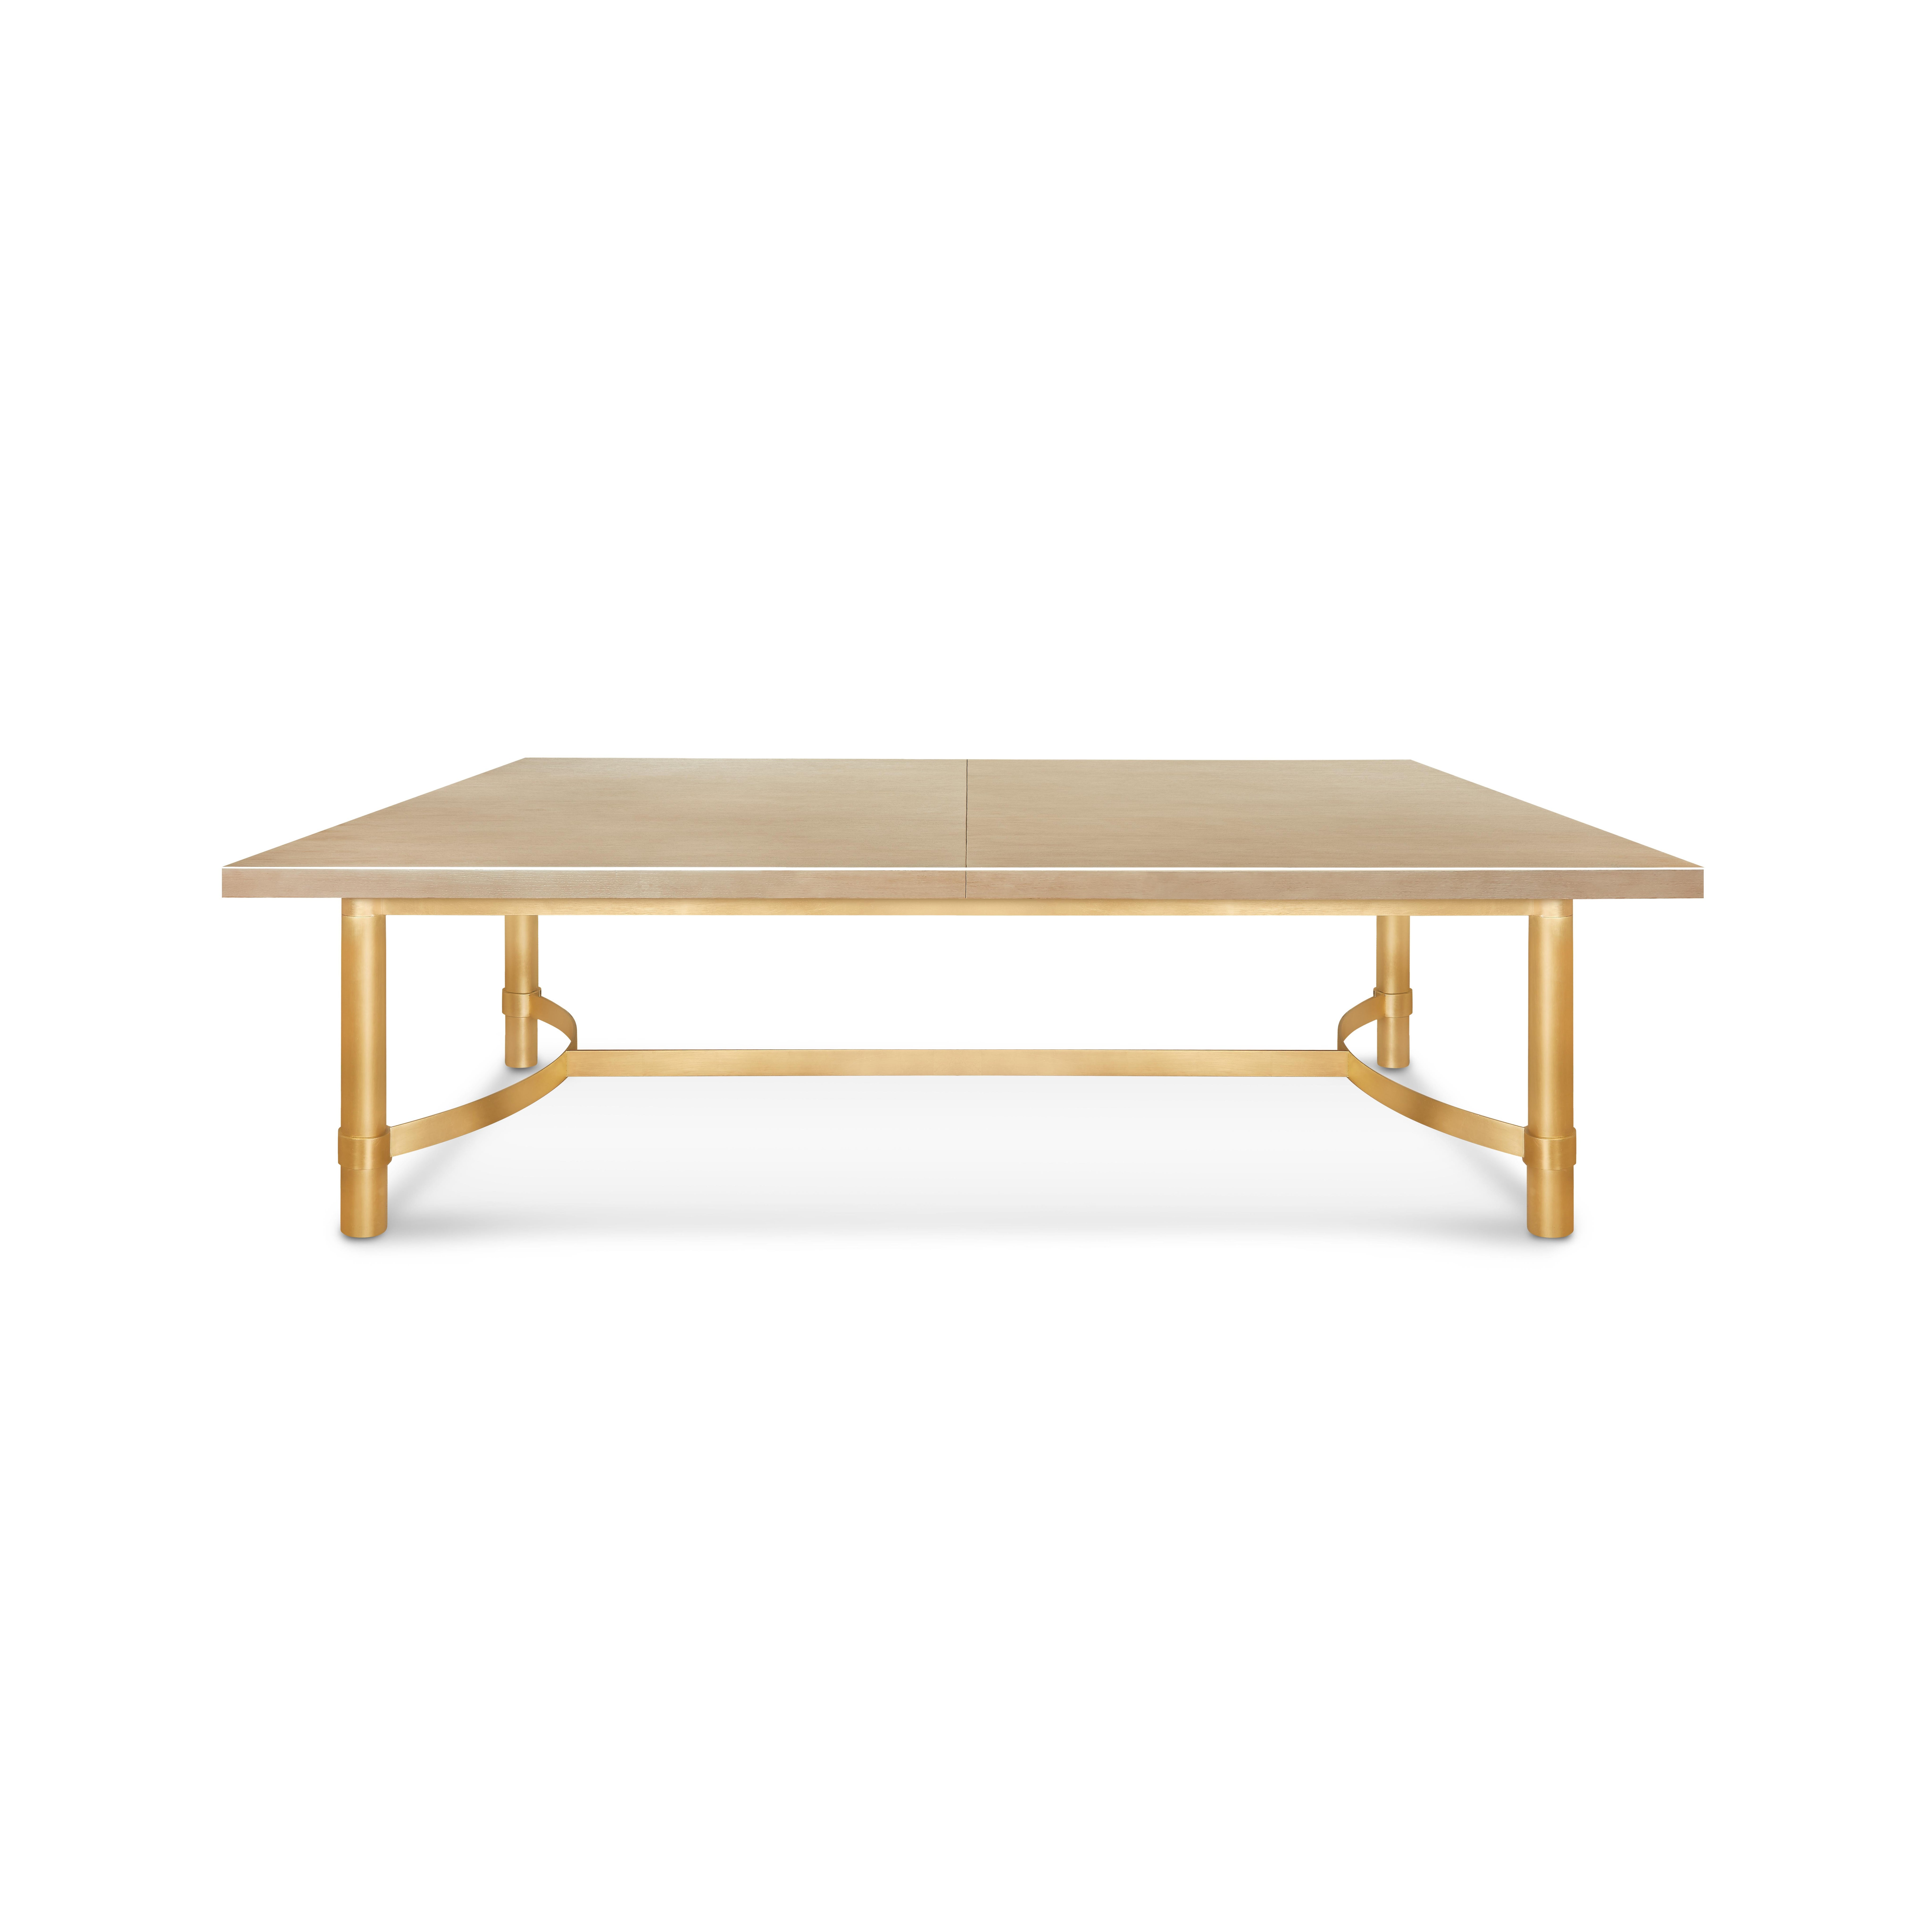 Capacious dining tables anchor a room, and our Rochester dining table easily seats a large group with the addition of its leaf. The beautiful top is supported by gilded round wood legs which are joined by a gilded metal band stretcher.
